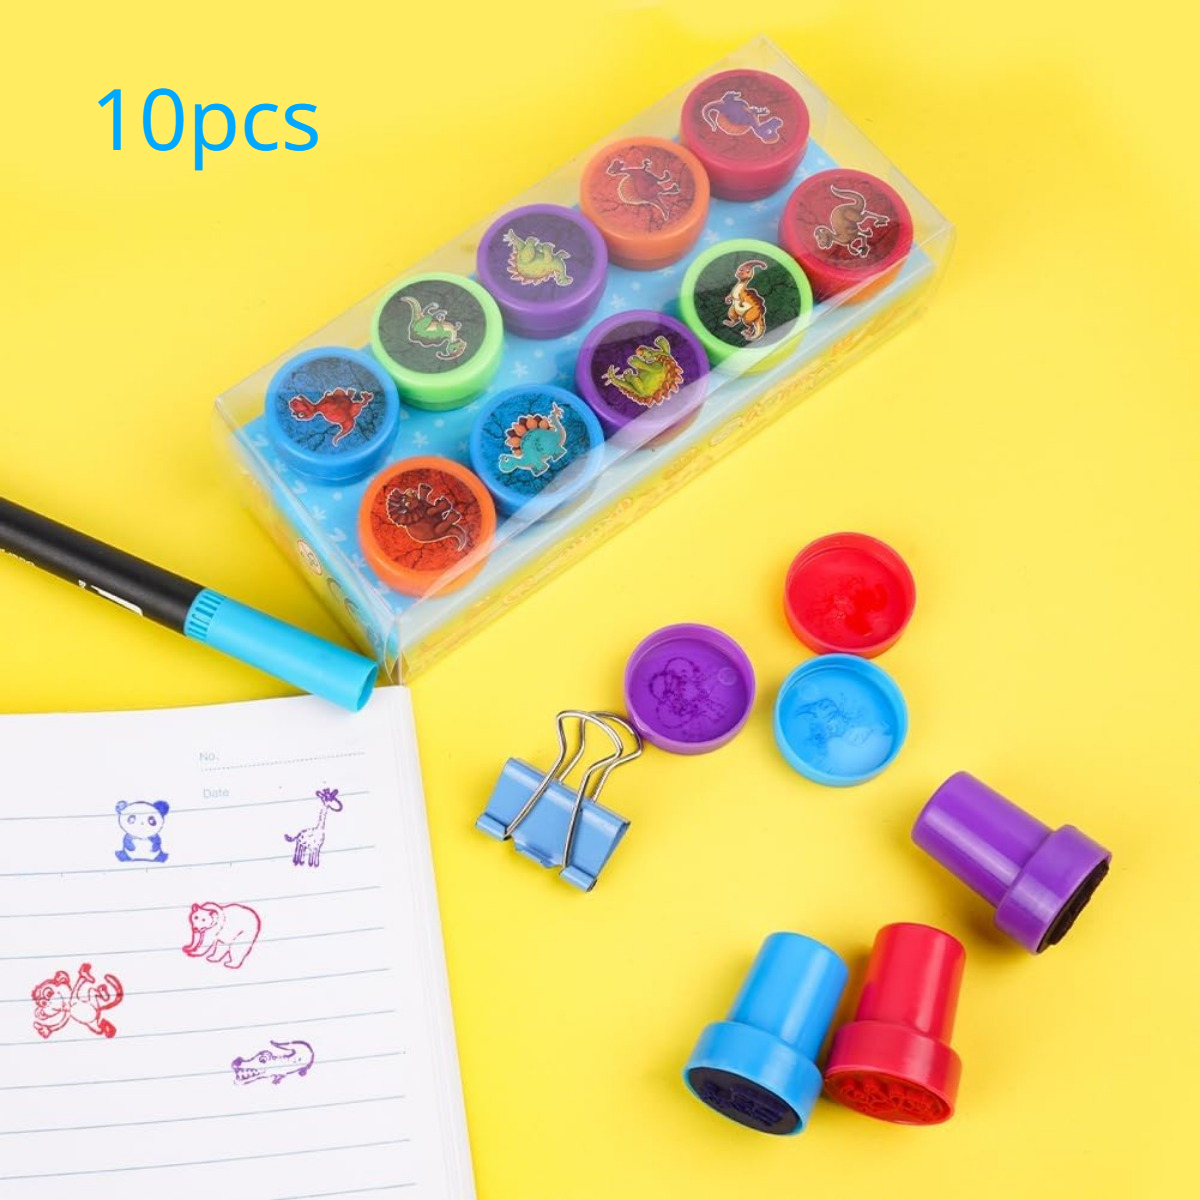 10pcs Assorted Stamps For Kids, Self-Inking Stampers For Arts And Crafts,  Novelty Toys For Kids Birthday Gift, Perfect Party, Teacher Stamps